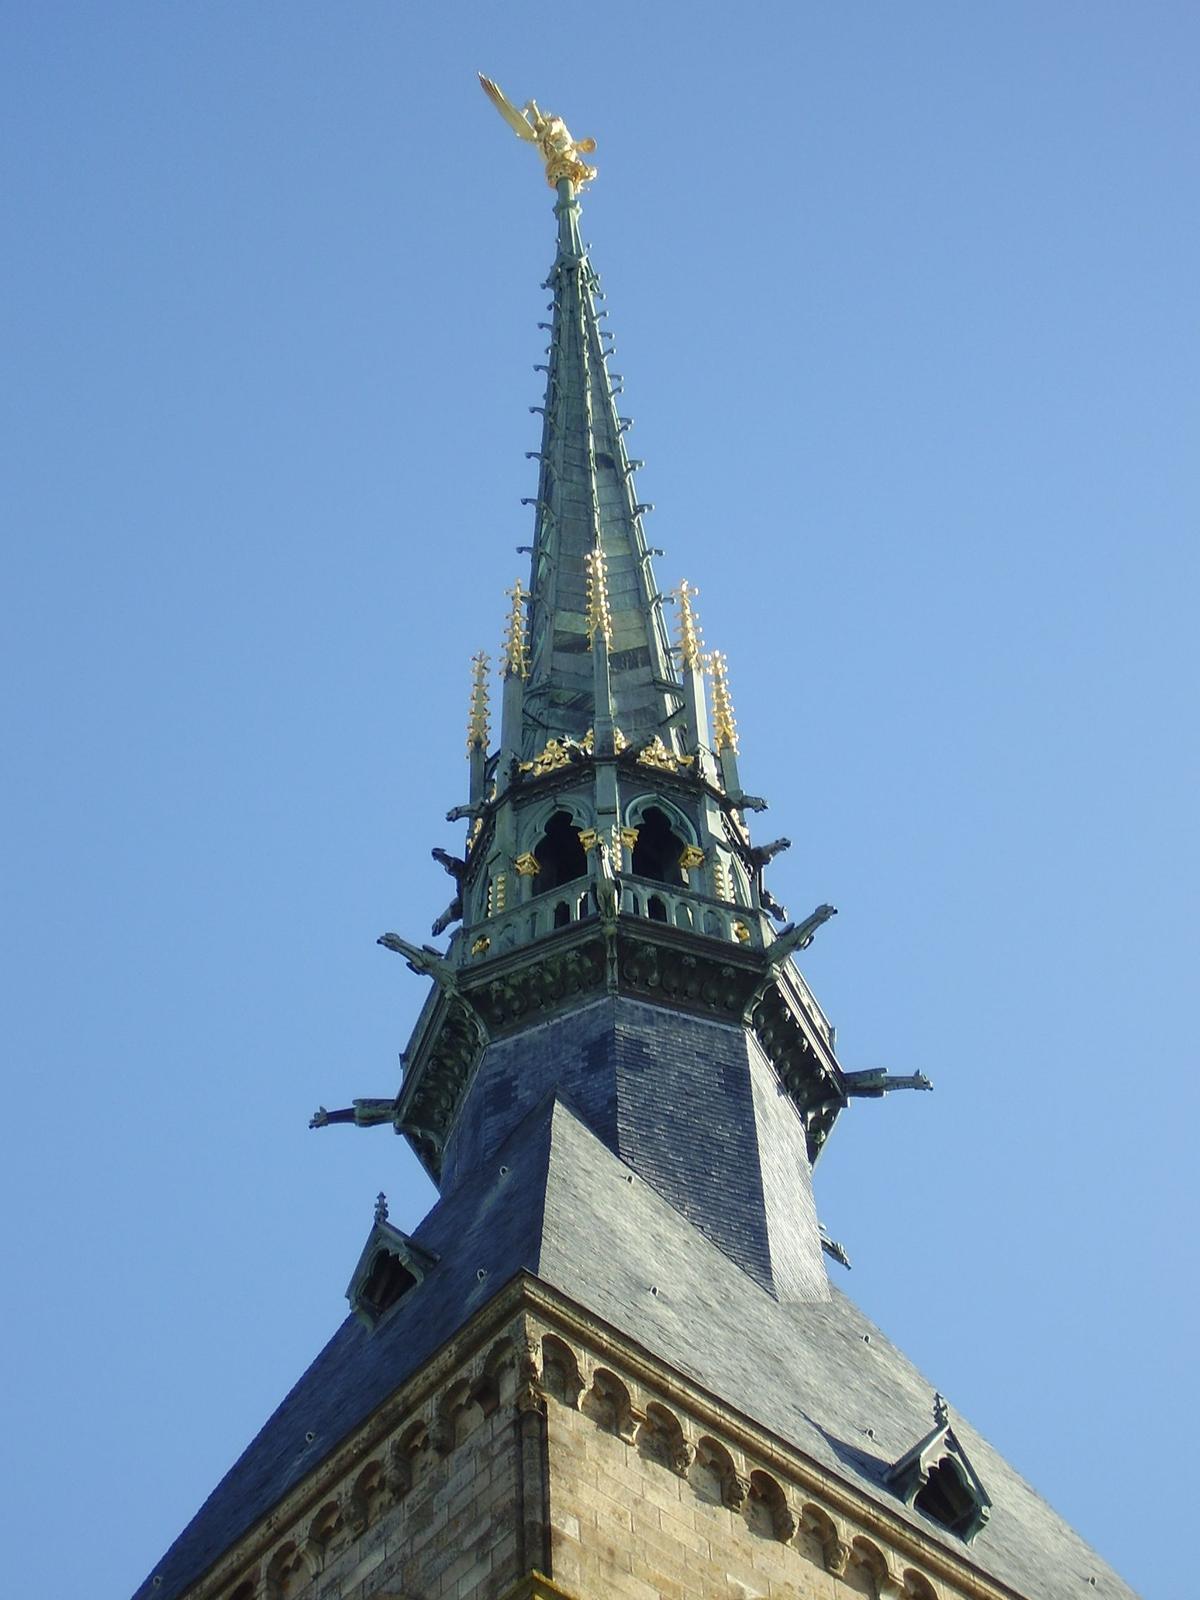 The statue of the Archangel Michael crushing the evil dragon under his feet stands atop a lofty spire that soars 300 feet towards the heavens. (Kamel15/CC BY-SA 3.0 DEED)